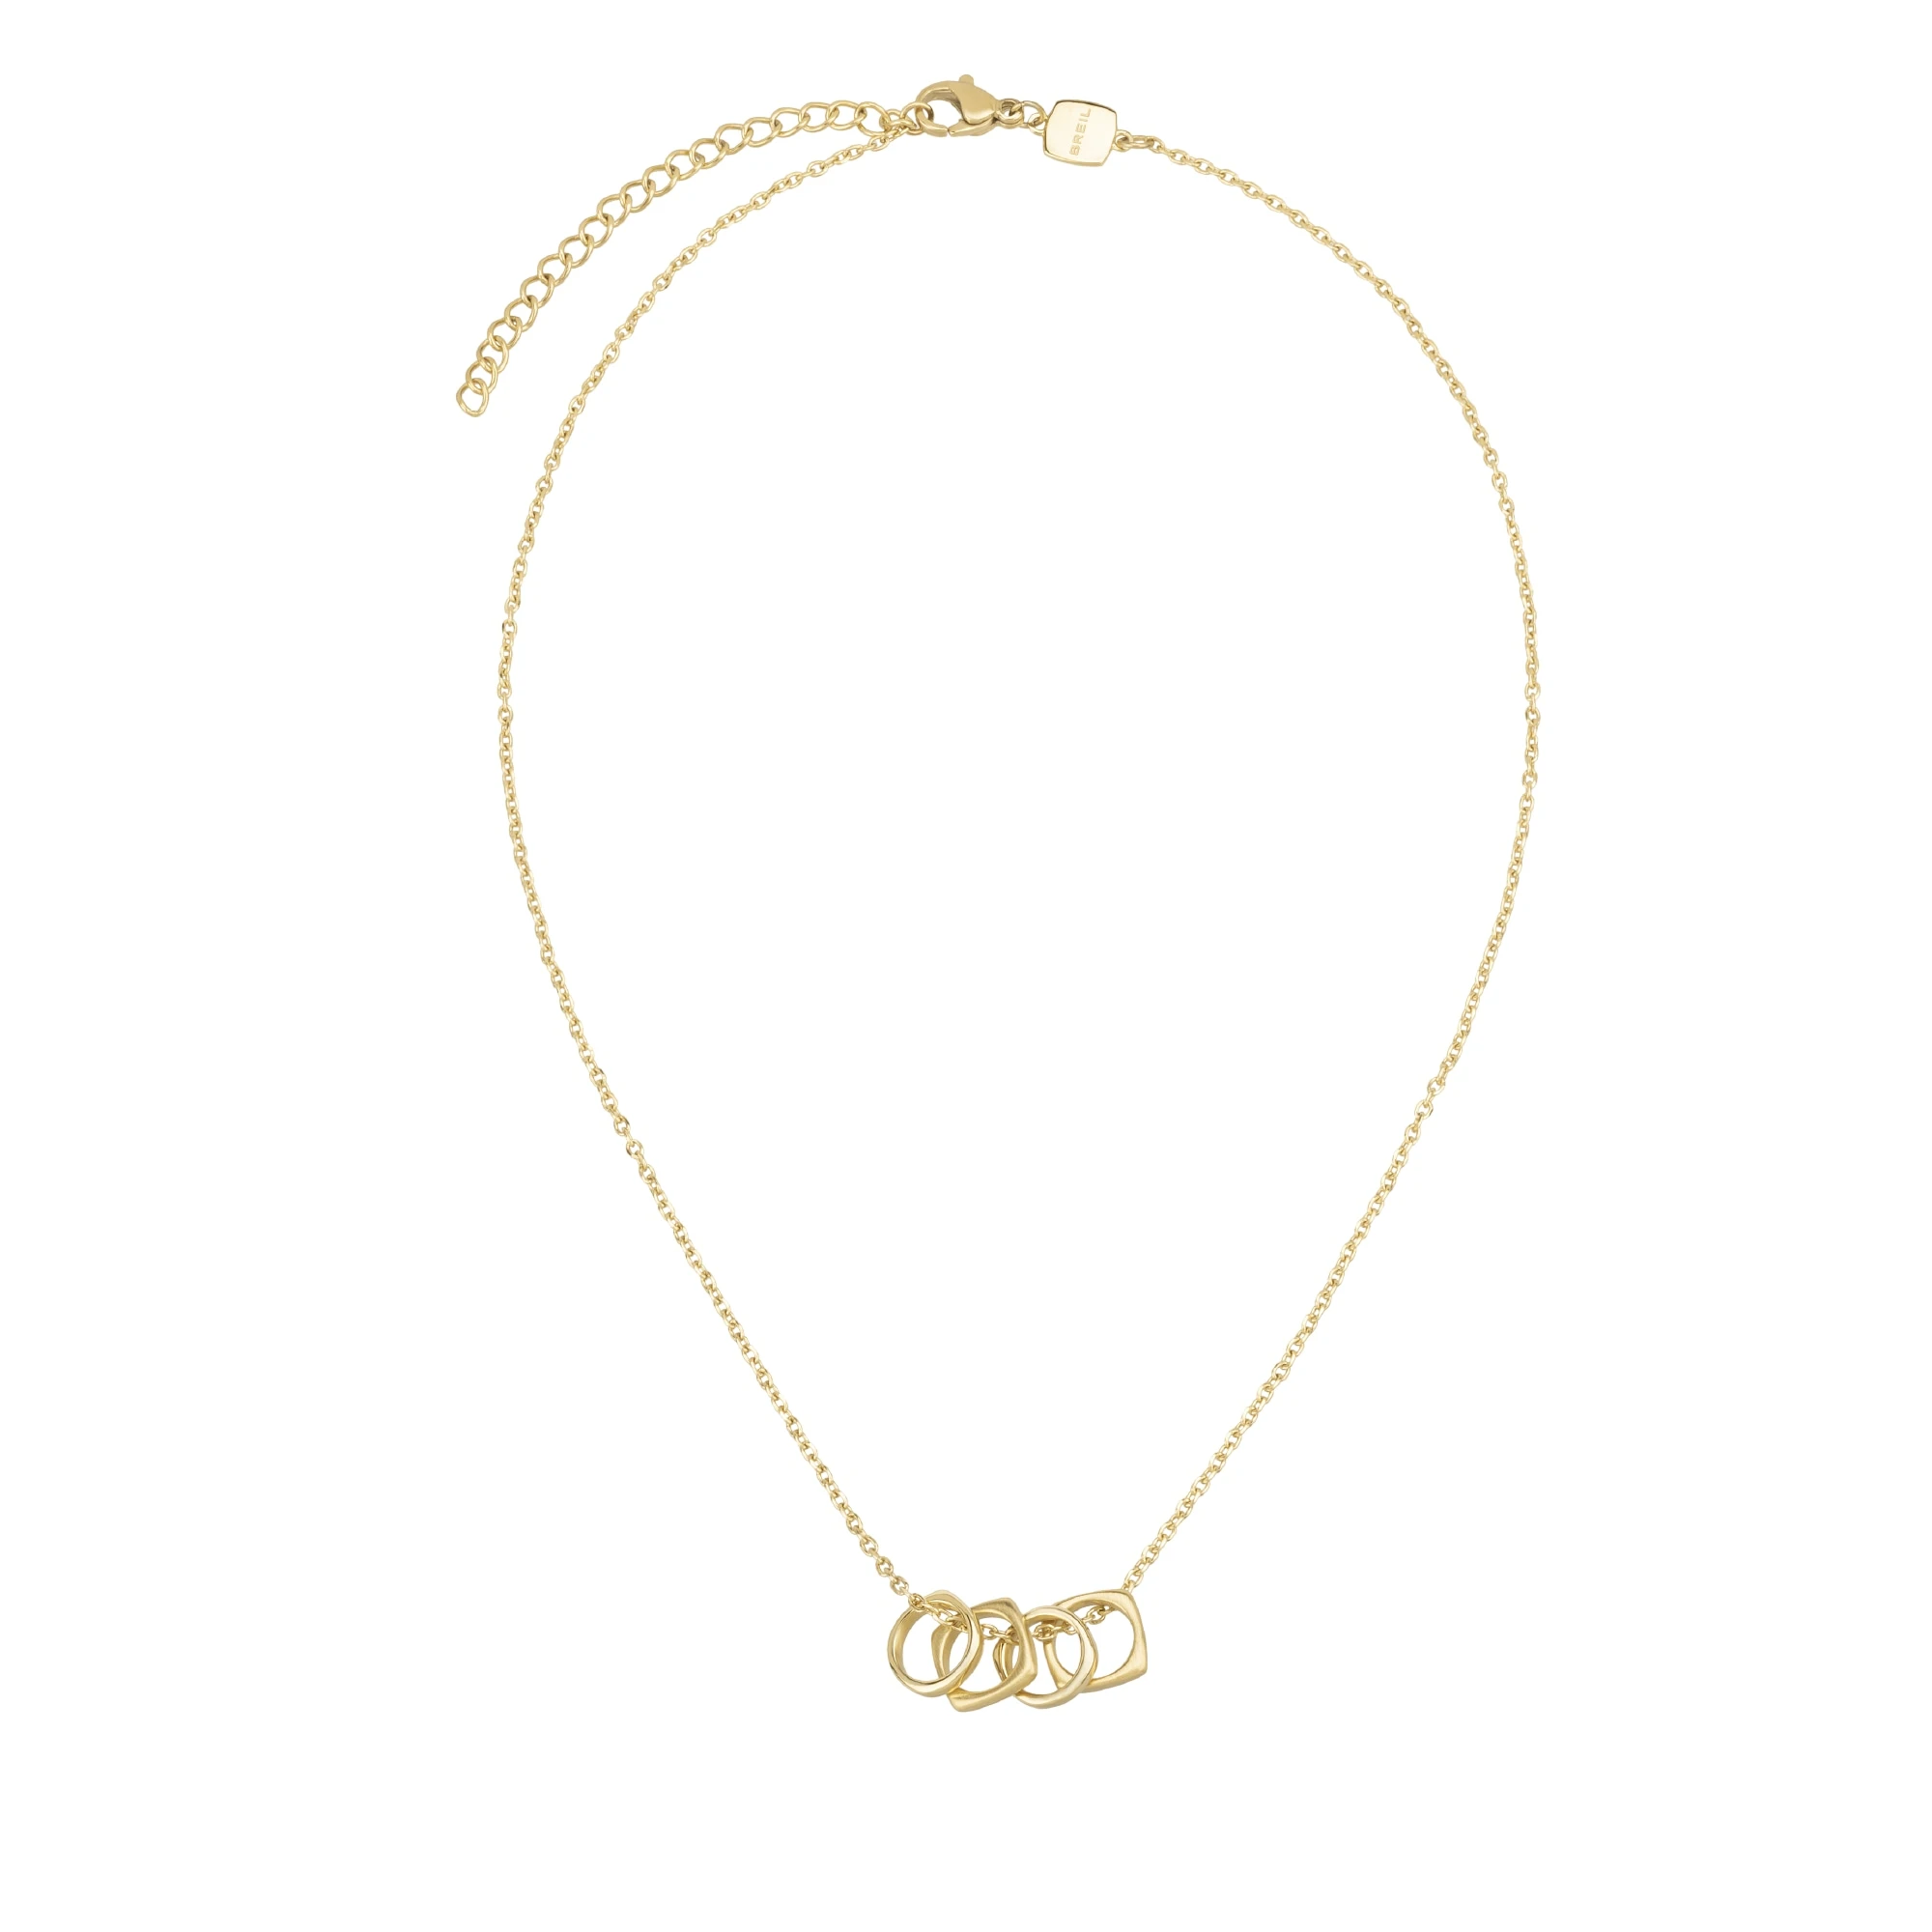 NEW TETRA - IP GOLD STEEL NECKLACE WITH MICRO-CHAIN AND PENDANTS - 1 - TJ3166 | Breil